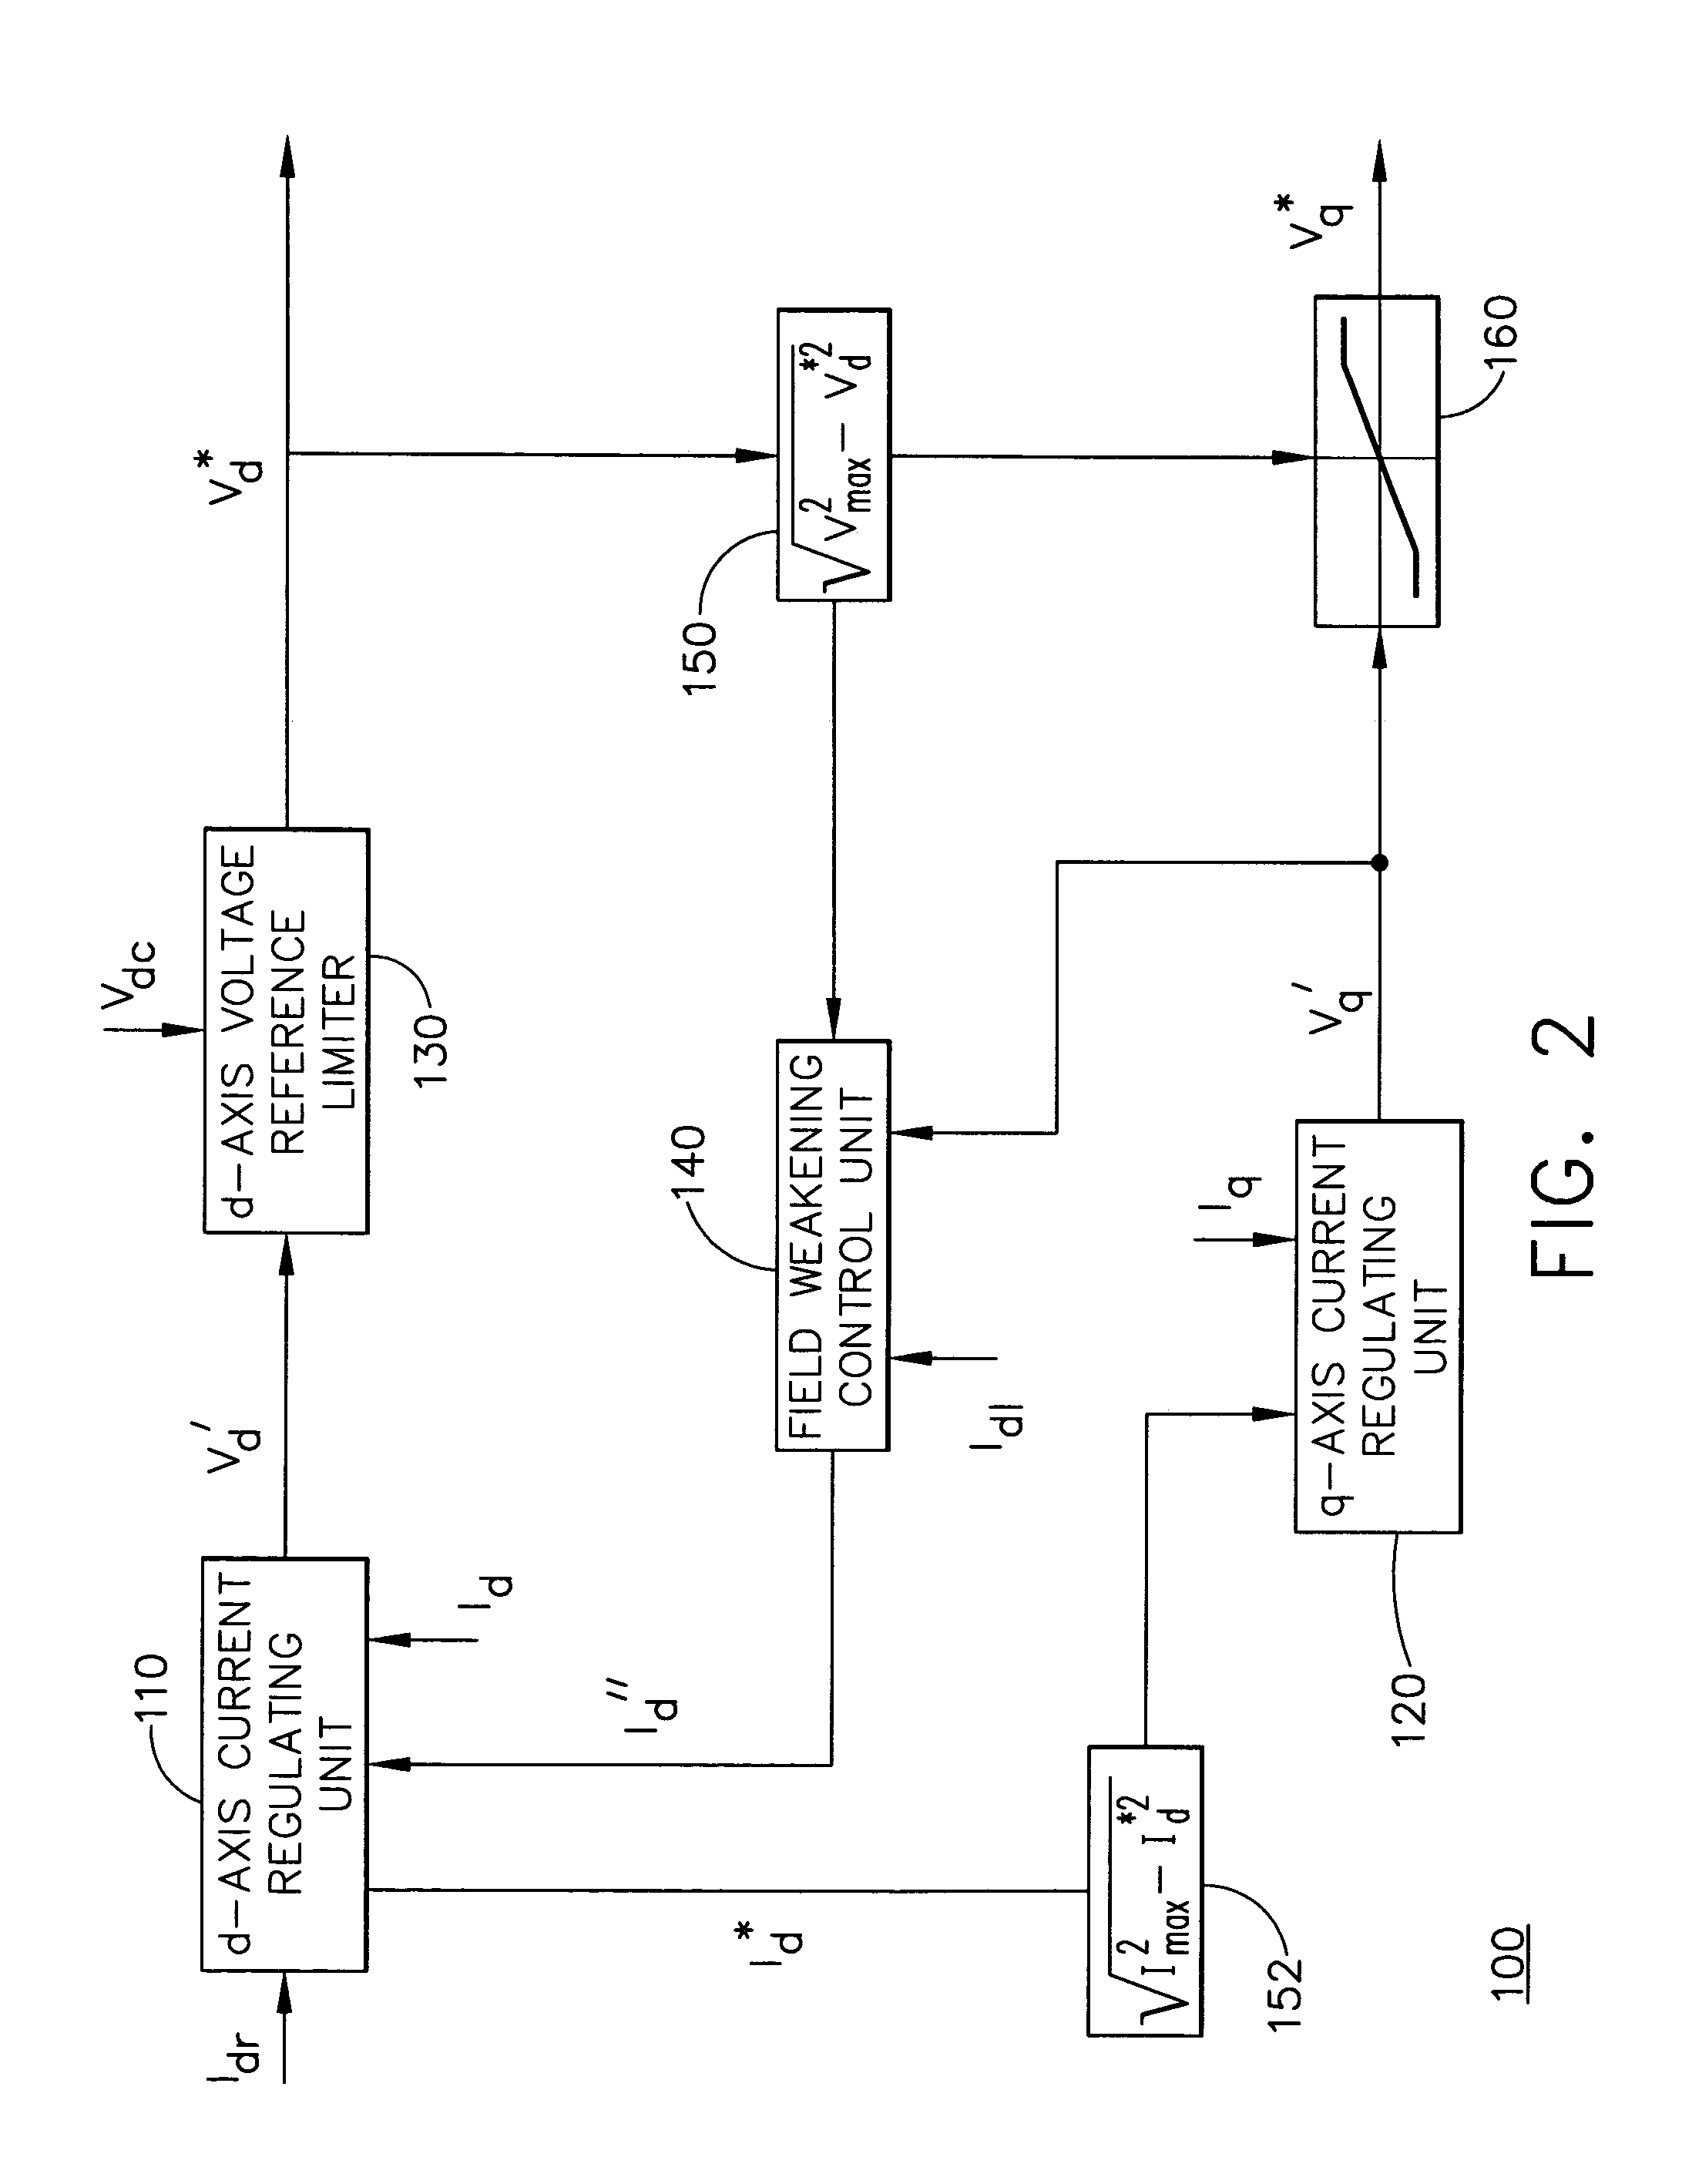 Method and apparatus for field weakening control in an AC motor drive system